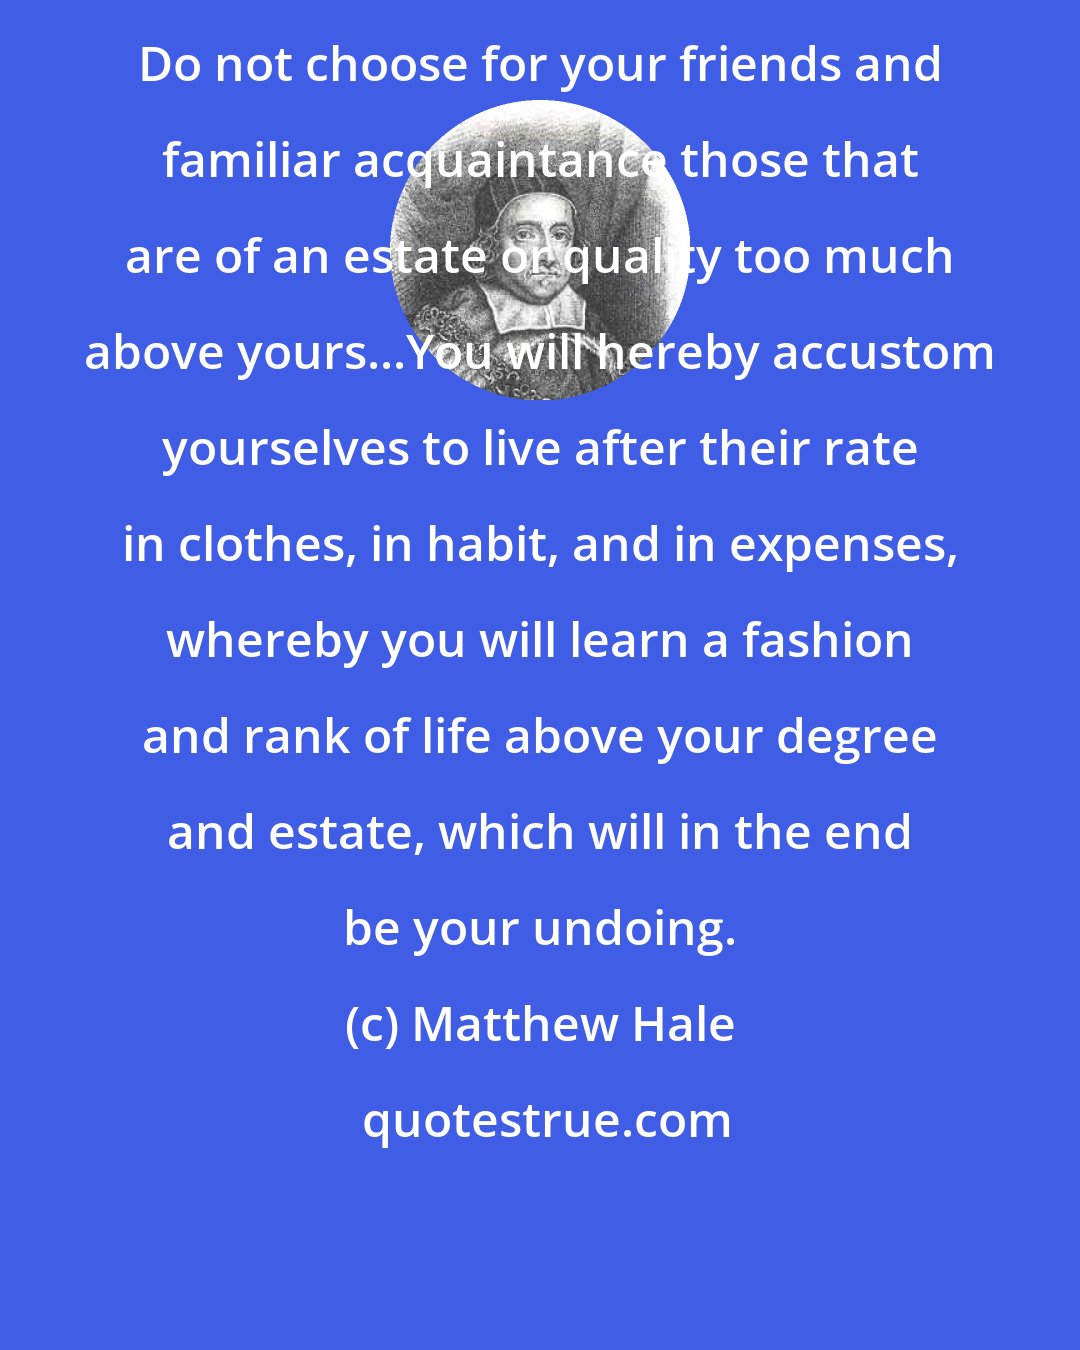 Matthew Hale: Do not choose for your friends and familiar acquaintance those that are of an estate or quality too much above yours...You will hereby accustom yourselves to live after their rate in clothes, in habit, and in expenses, whereby you will learn a fashion and rank of life above your degree and estate, which will in the end be your undoing.